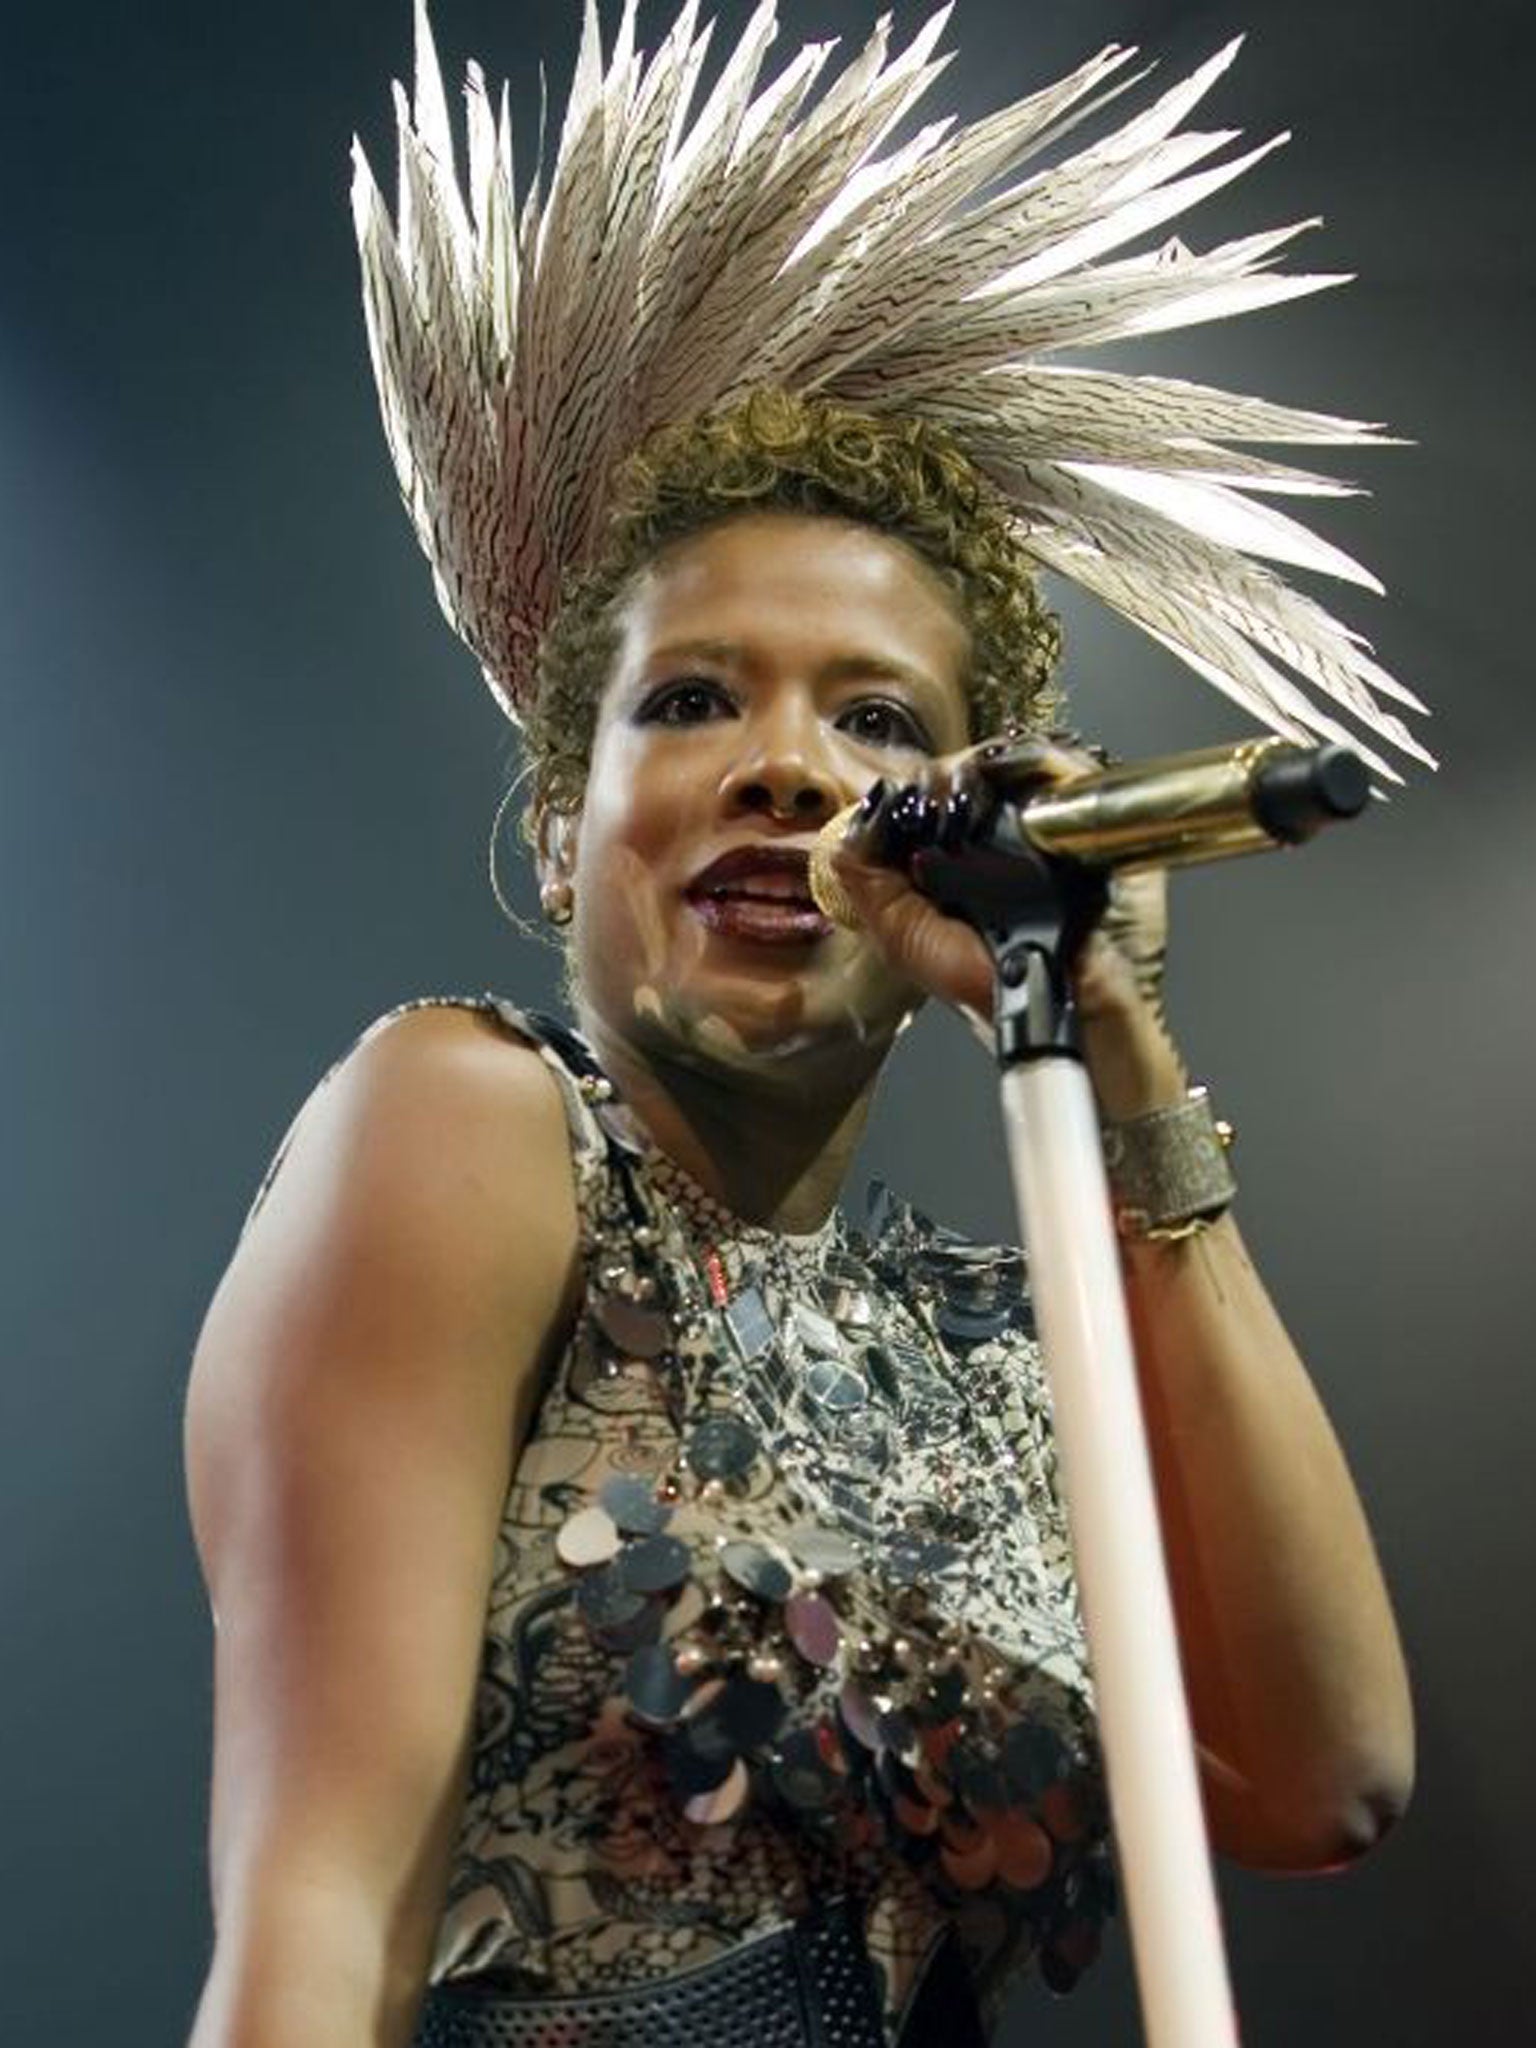 Kelis has recently signed to producer Dave Sitek's label